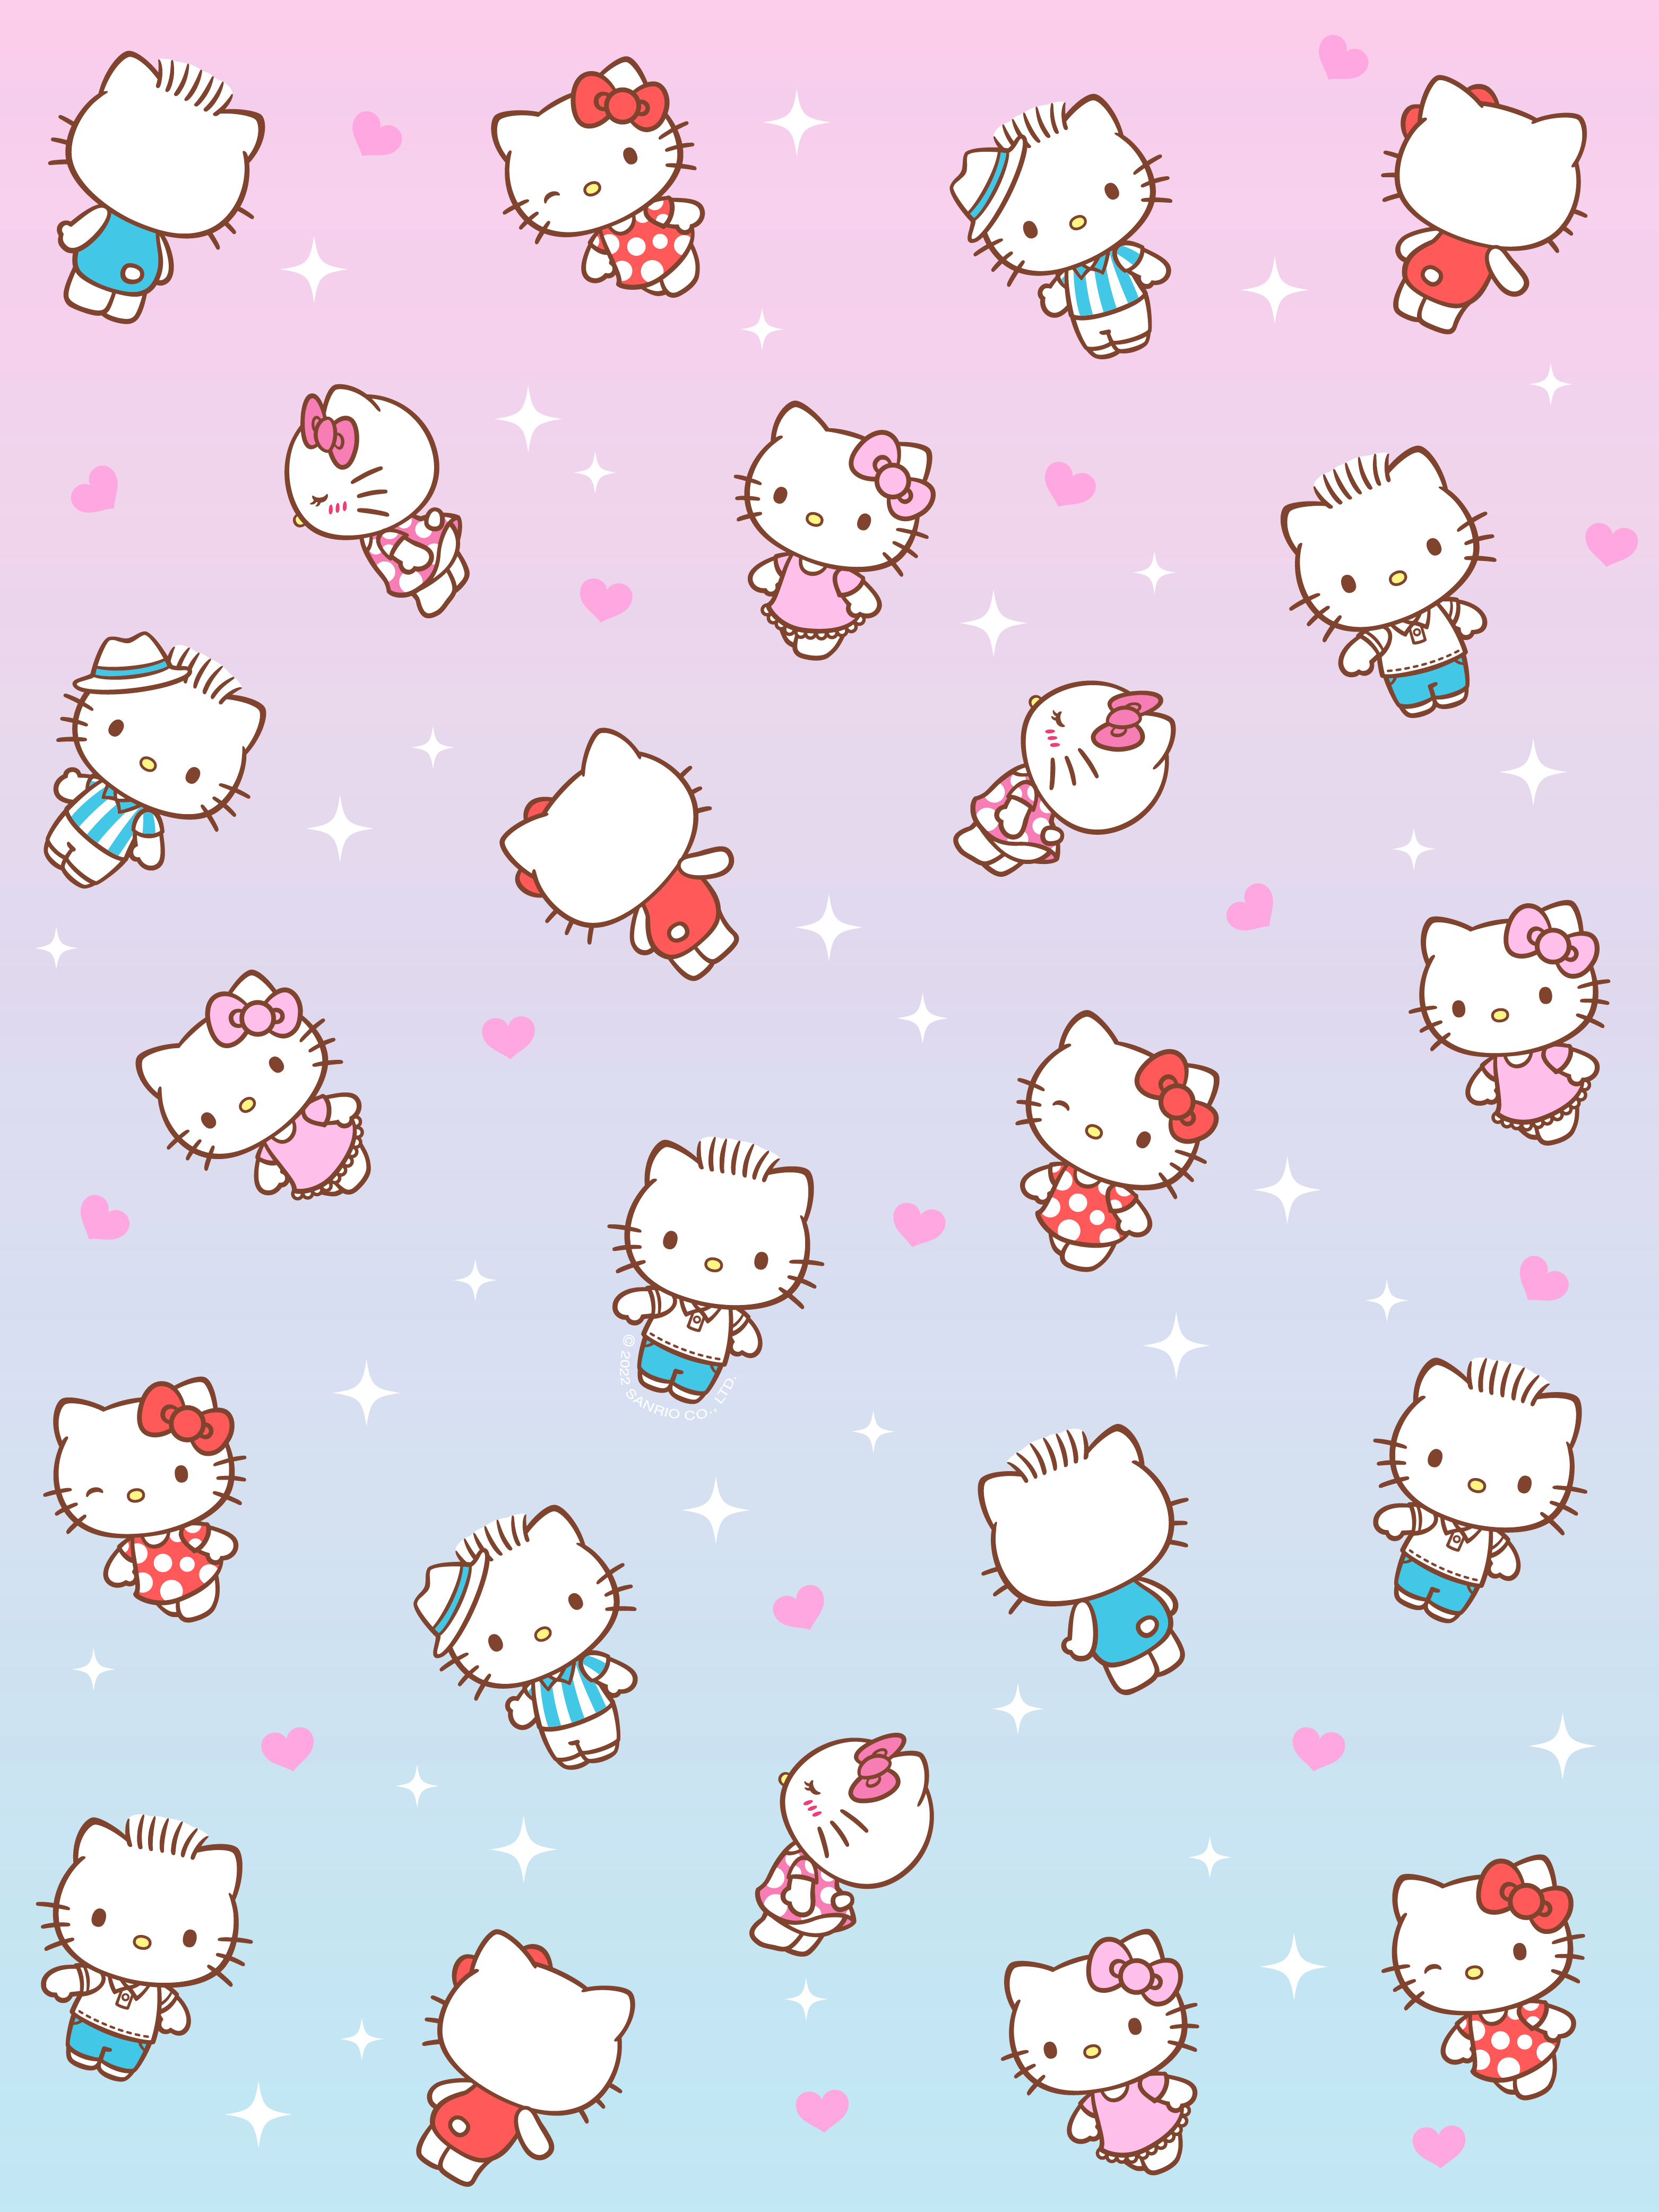 875 Hello Kitty Wallpaper 4k Photos  Images New 2023  485 Mood off  DP Images Photos Pics Download 2023